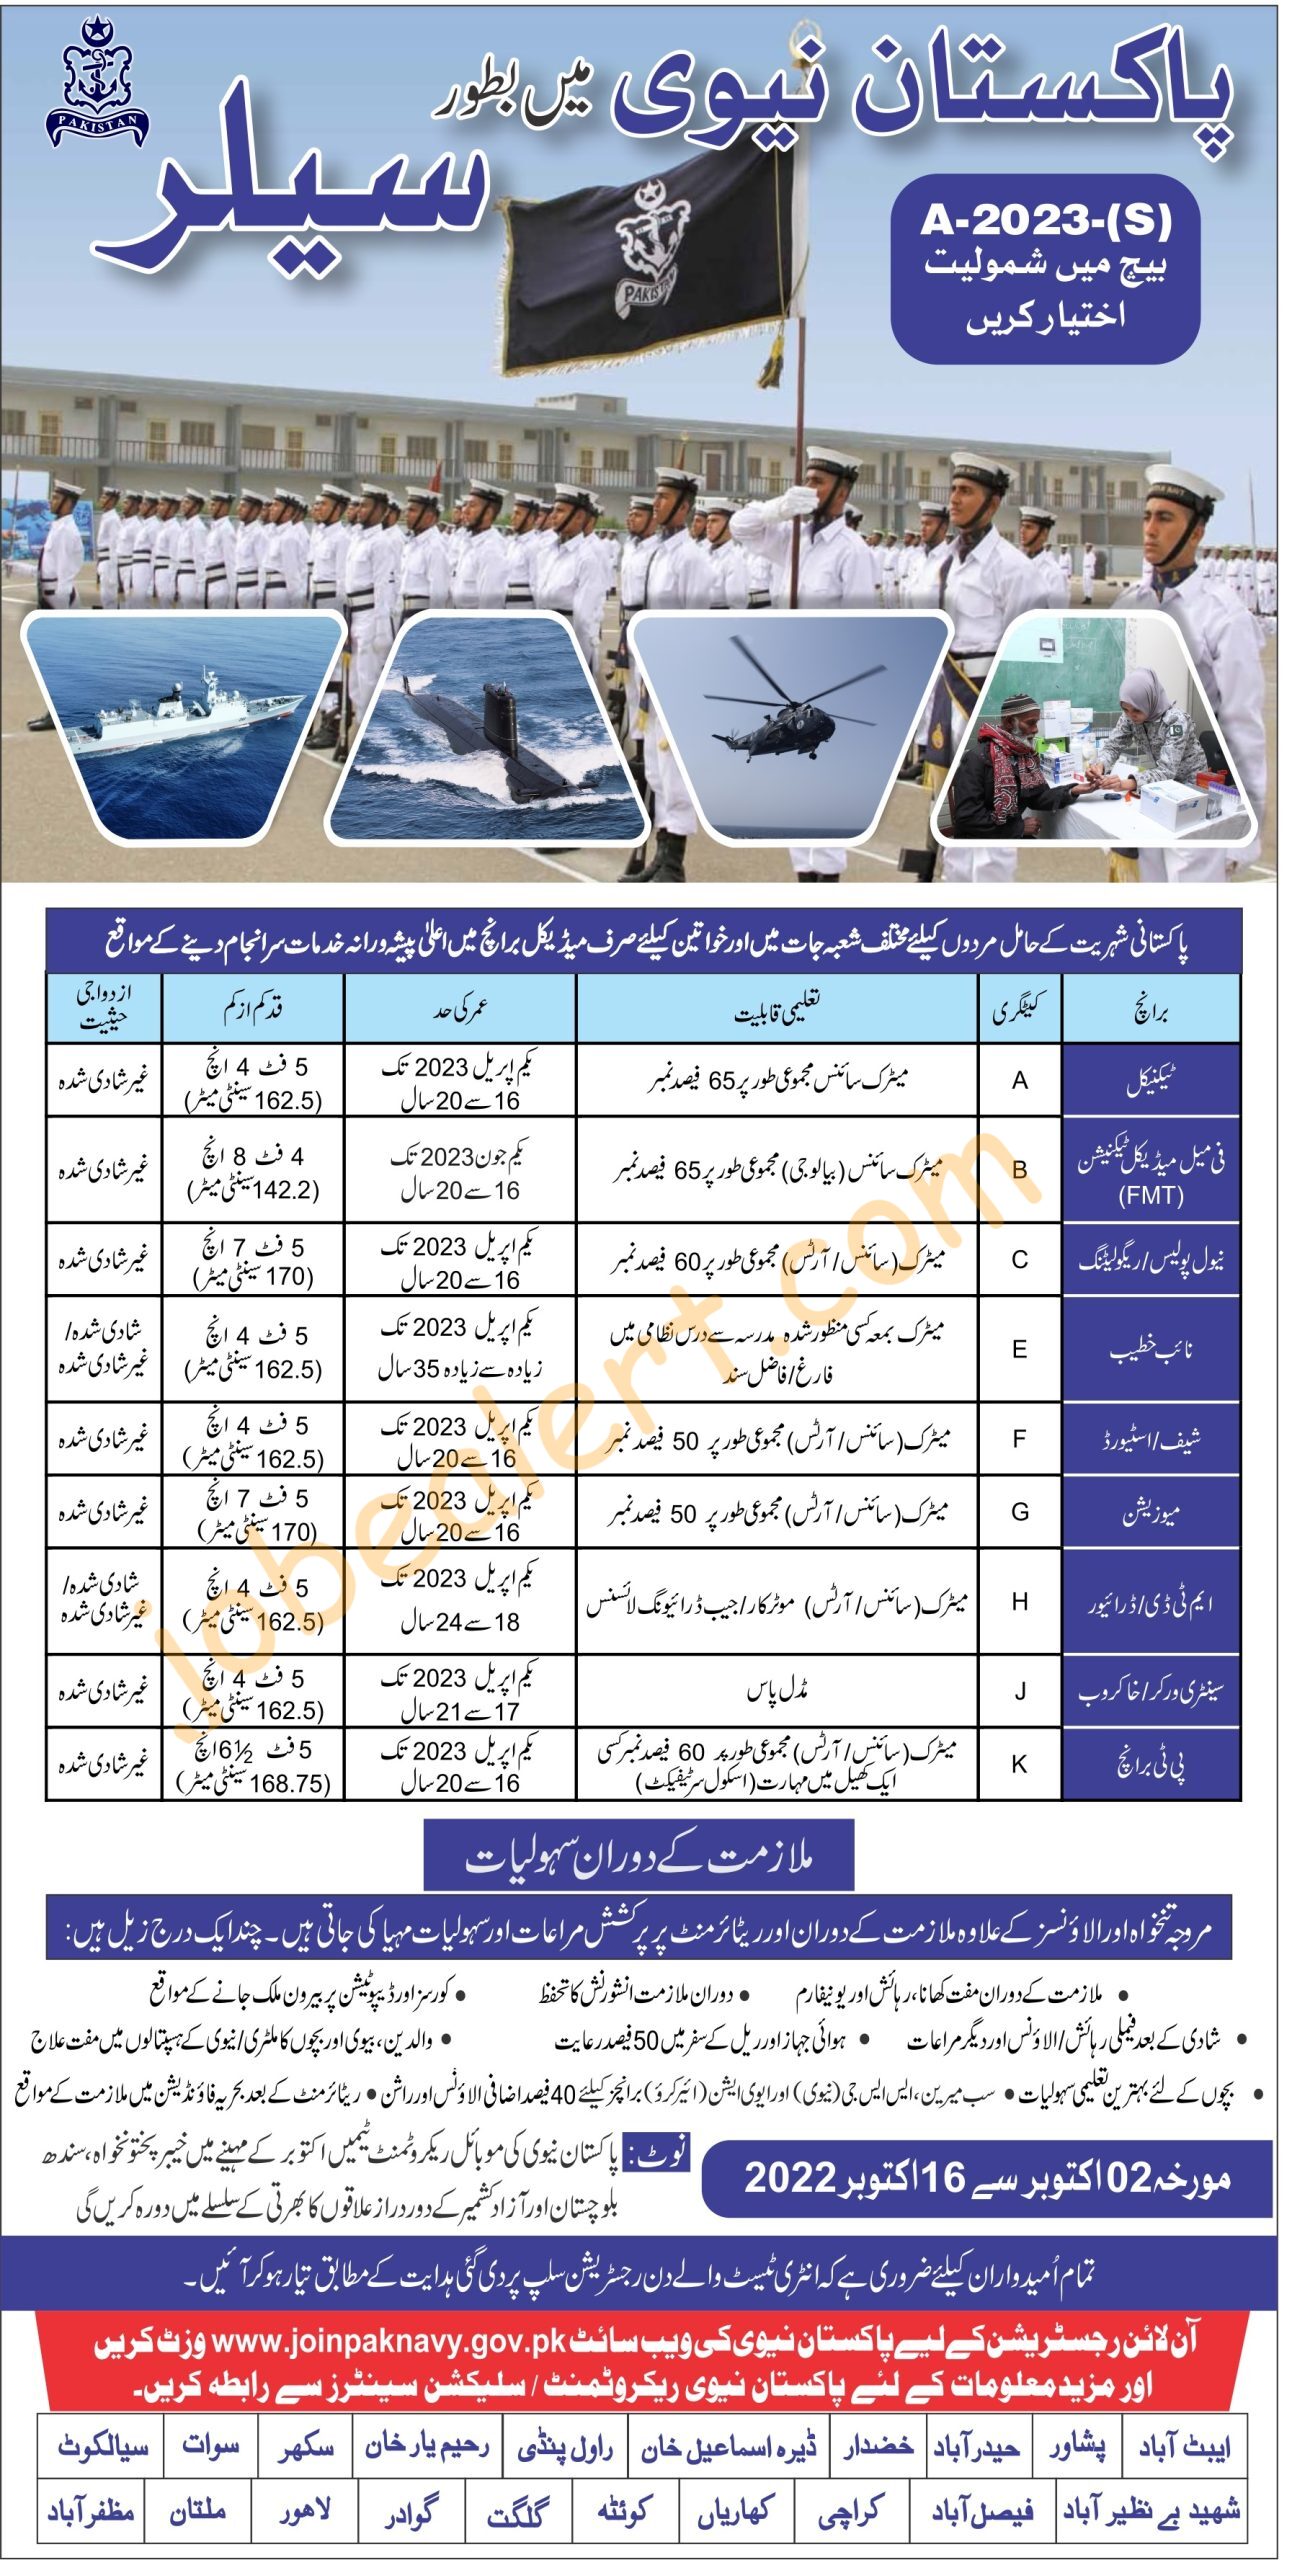 Official Advertisement of Join Pak Navy as Sailor Batch 2023-A